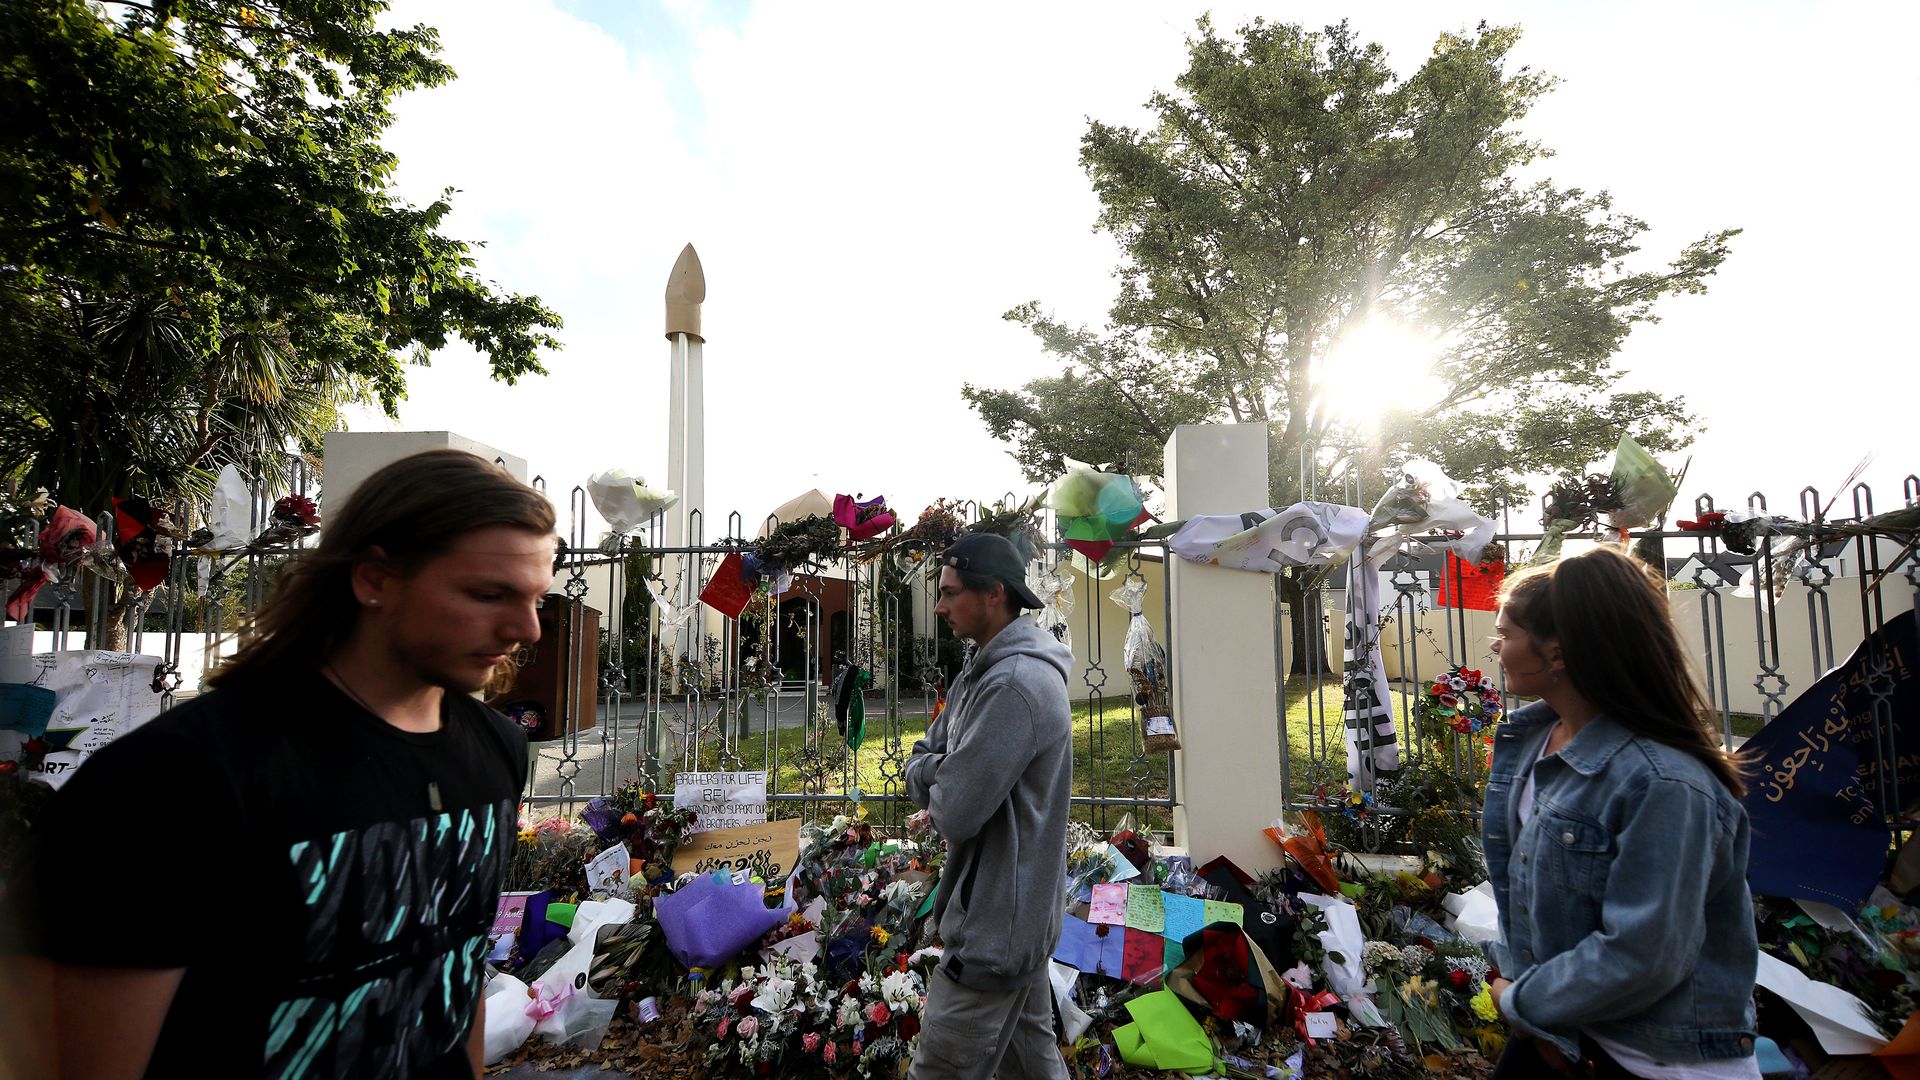 In this image, people walk by flowers and memorials laid out near a mosque fence.